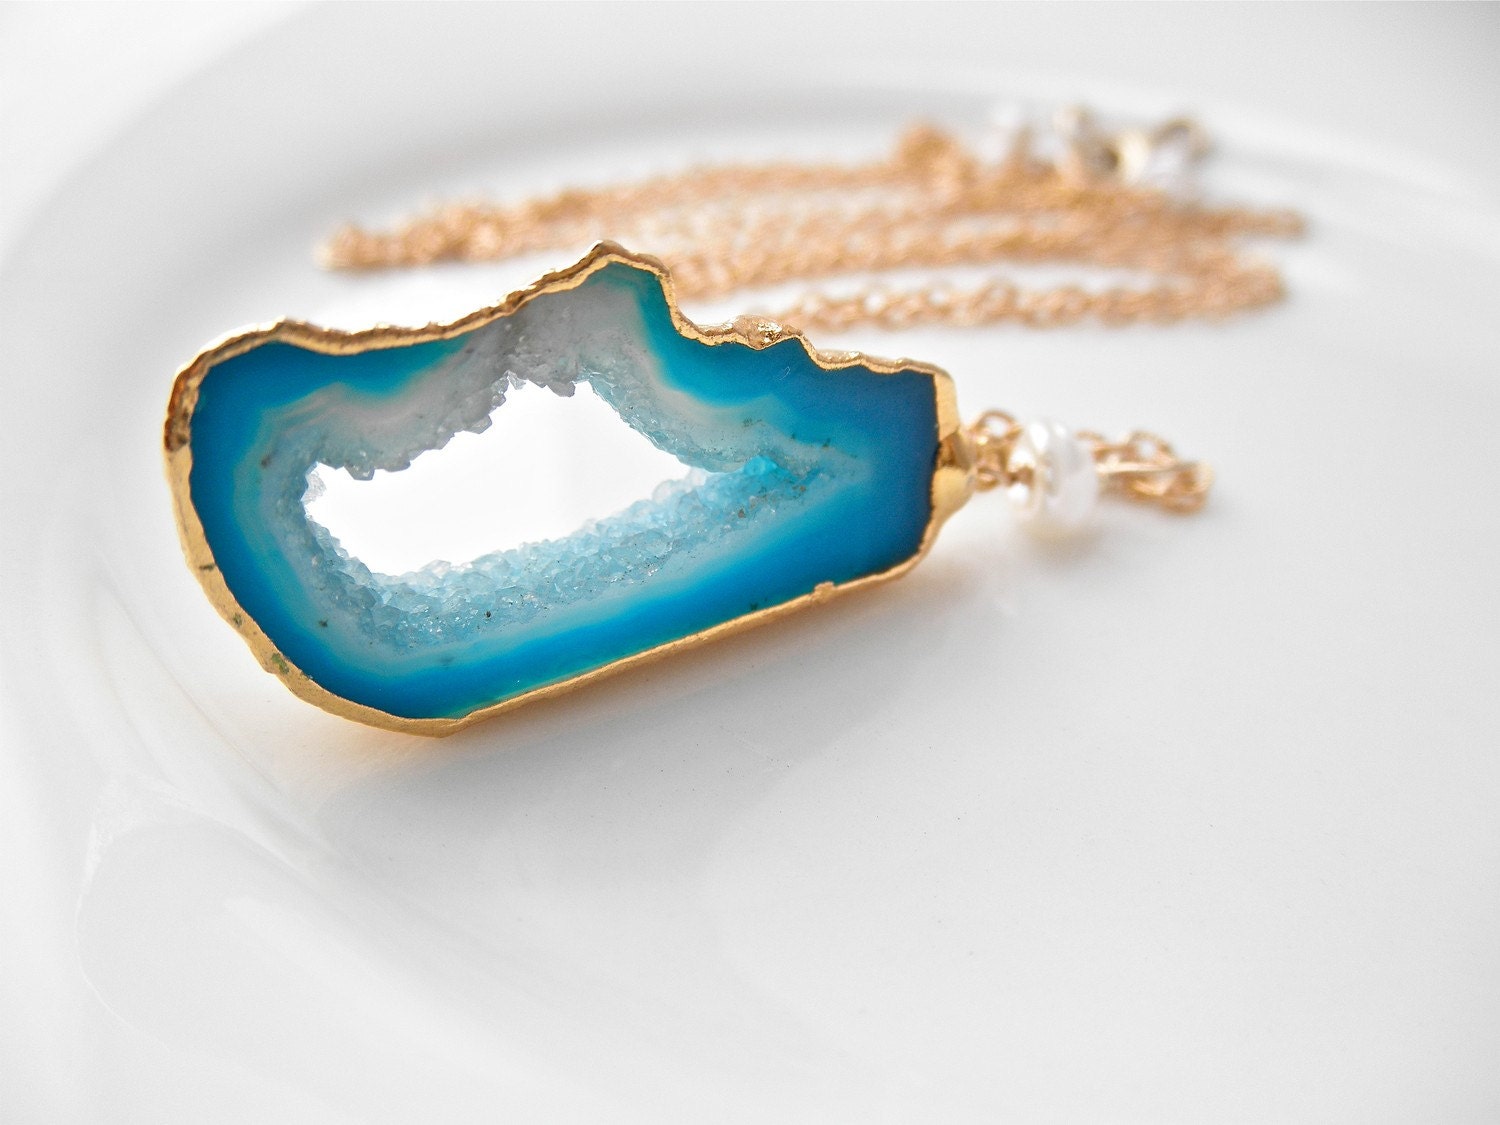 30 Inch Long Gold Filled Chain, Rave in the Cave Luxe Pendant Necklace - Sea Blue Druzy Agate Geode Slice